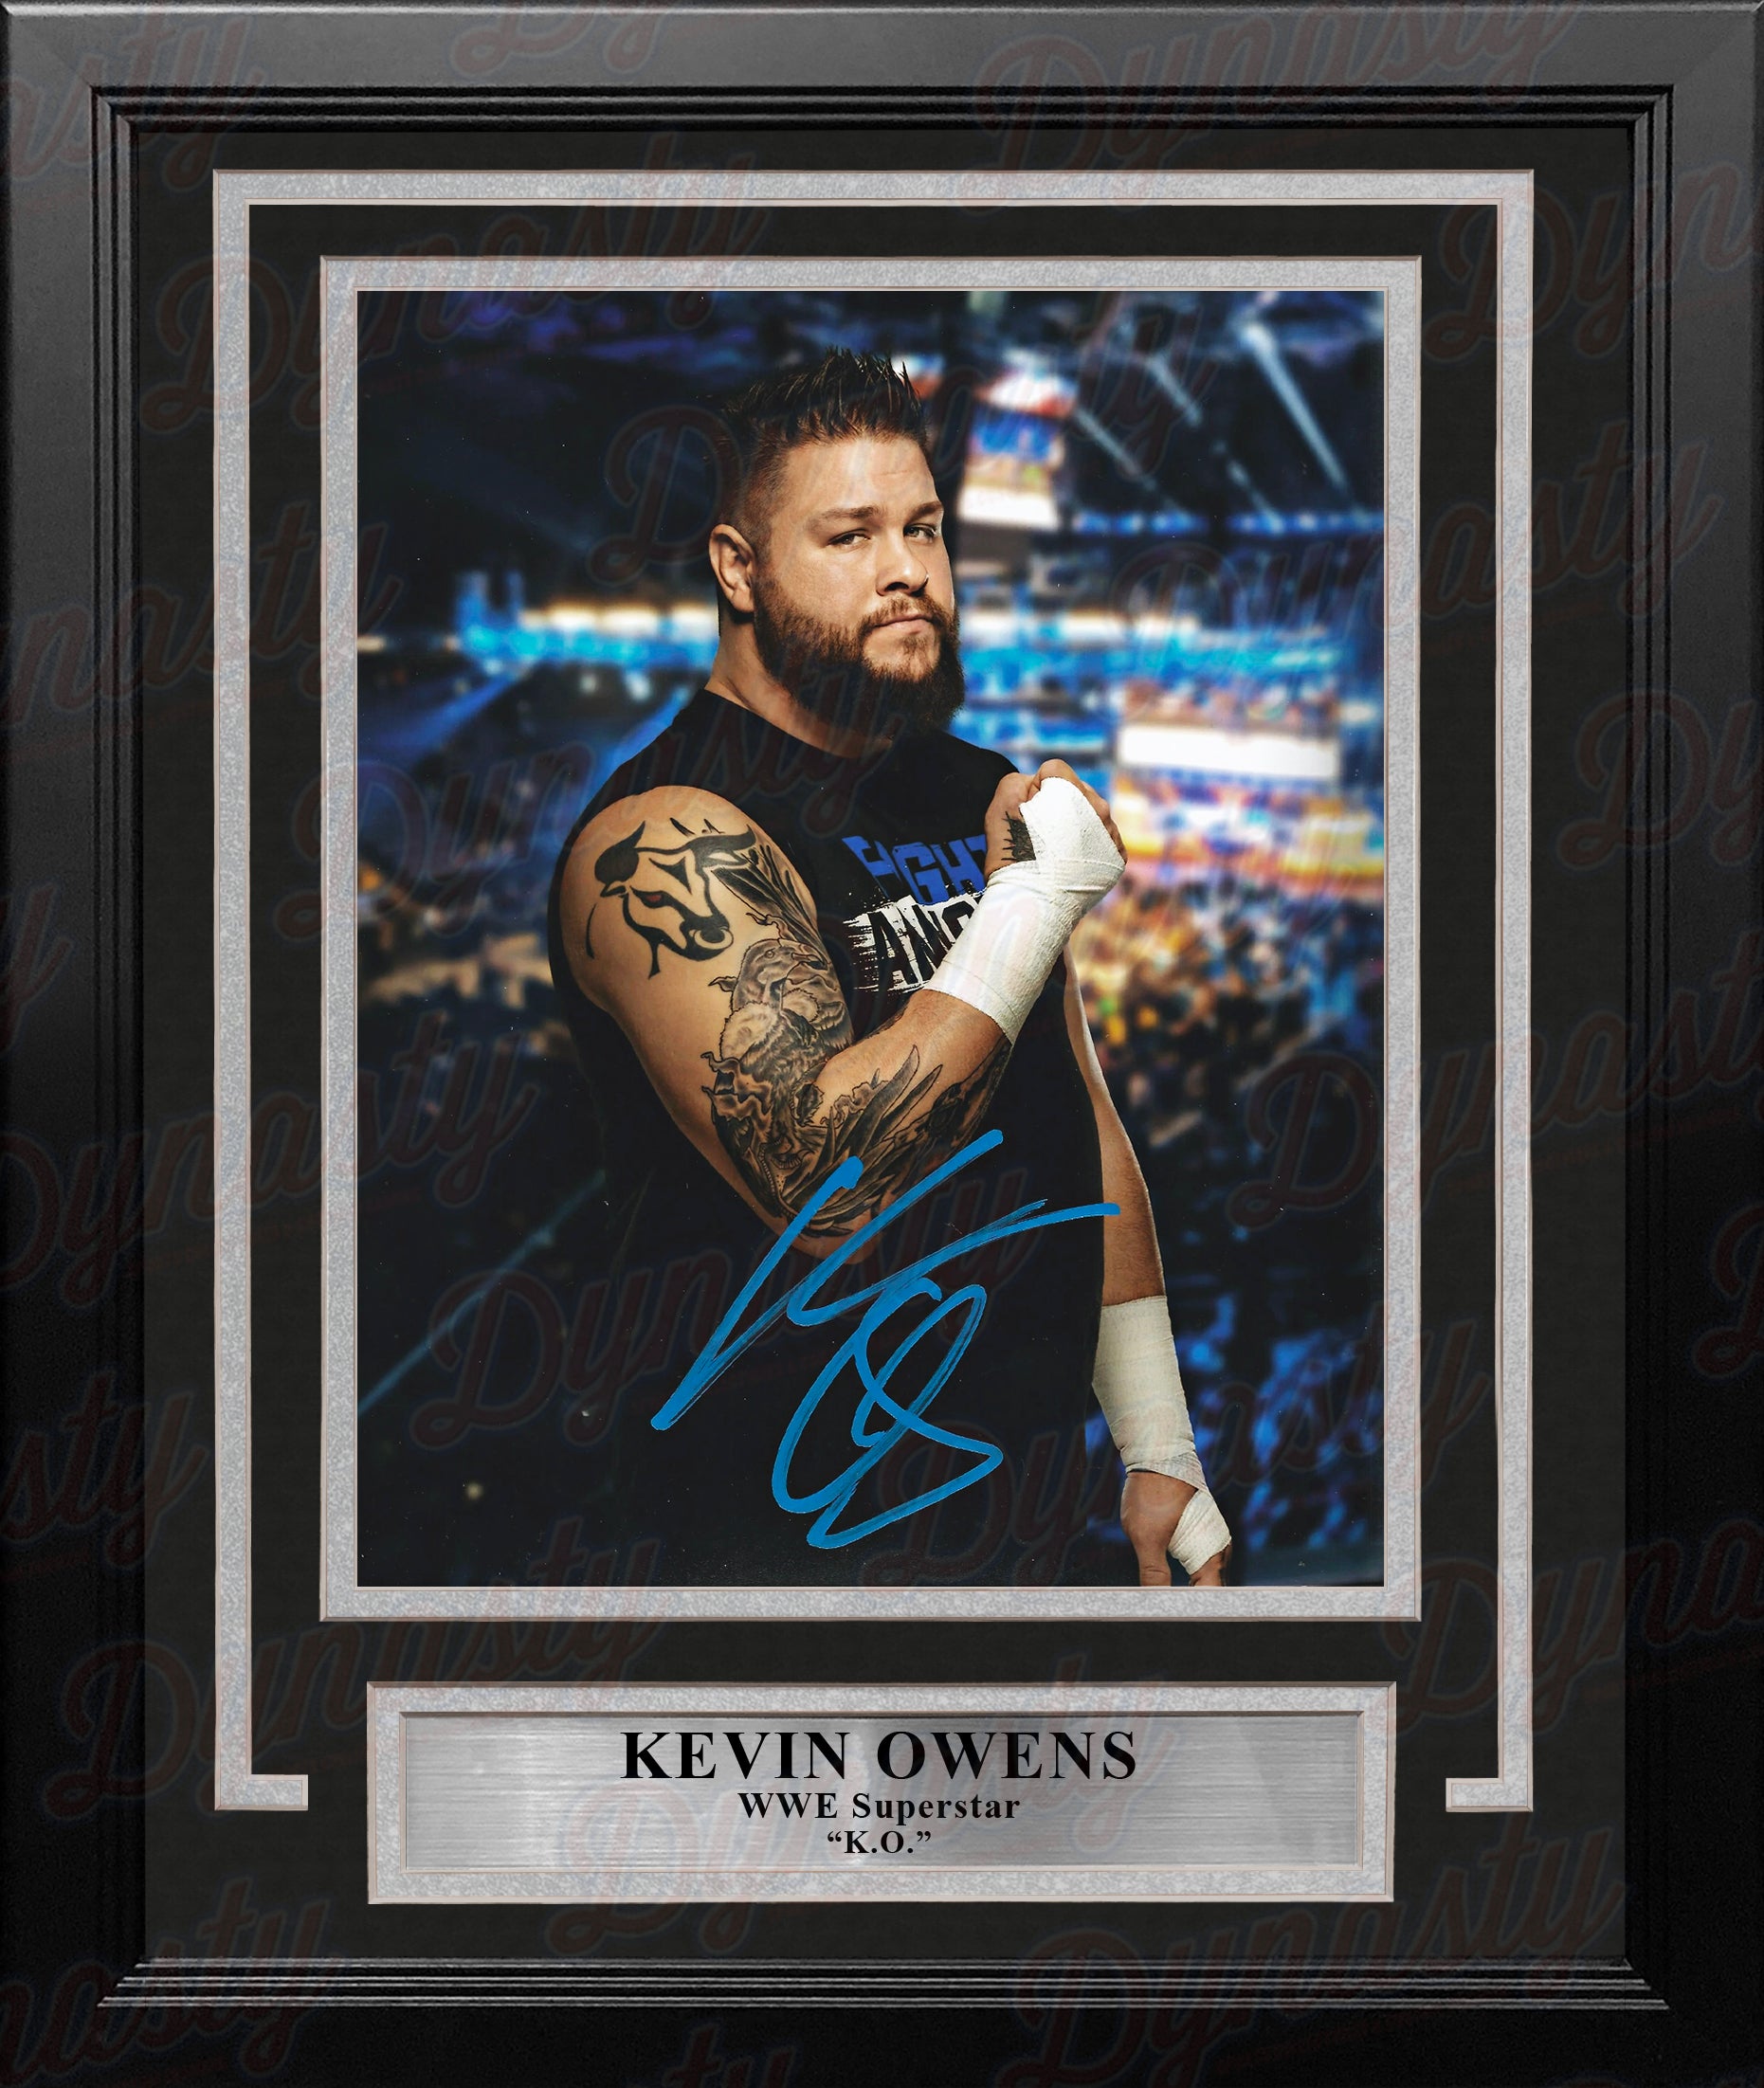 Kevin Owens Autographed WWE Wrestling Profile 8" x 10" Framed and Matted Photo - Dynasty Sports & Framing 